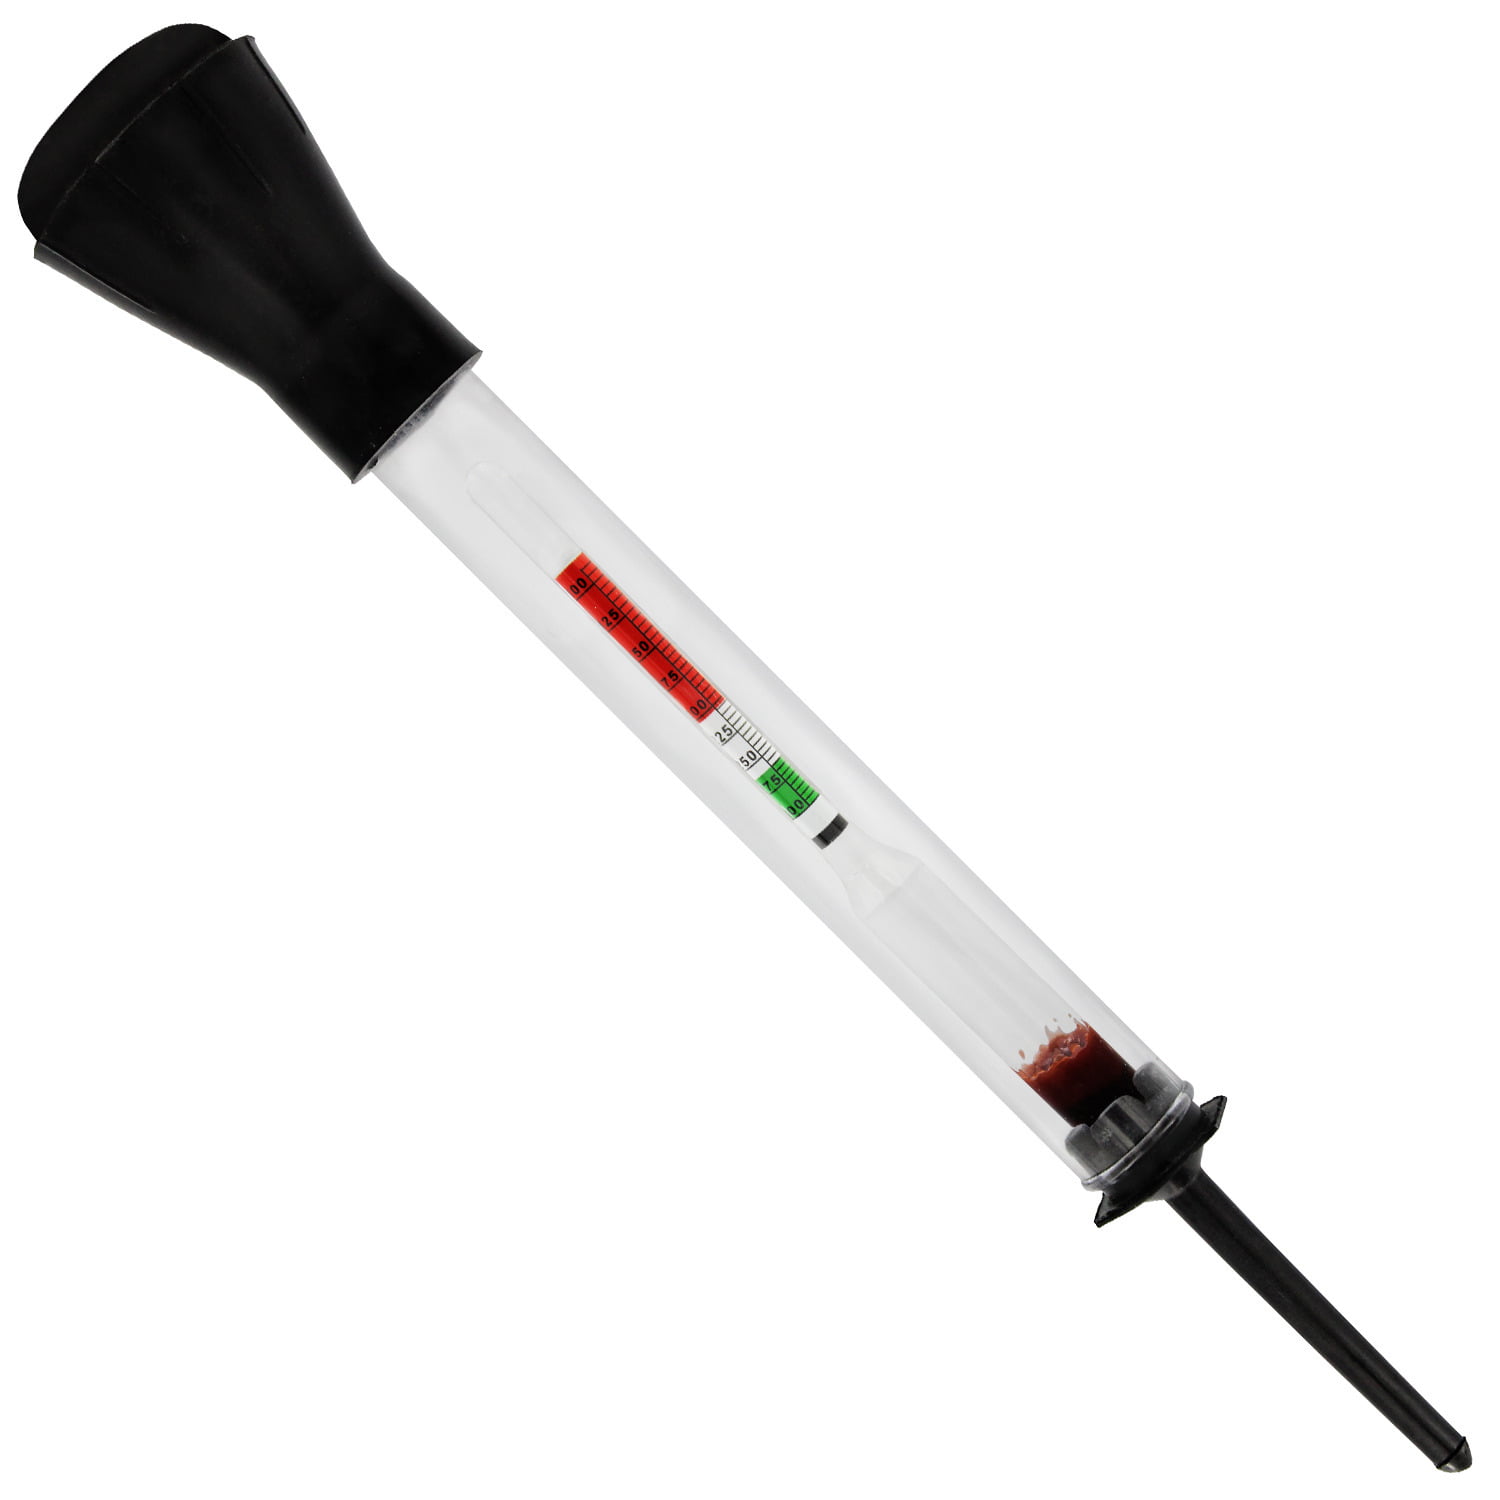 Black Cart Deep Cycle Battery Rapid Hydrometer Tester Fast Detection Tool 